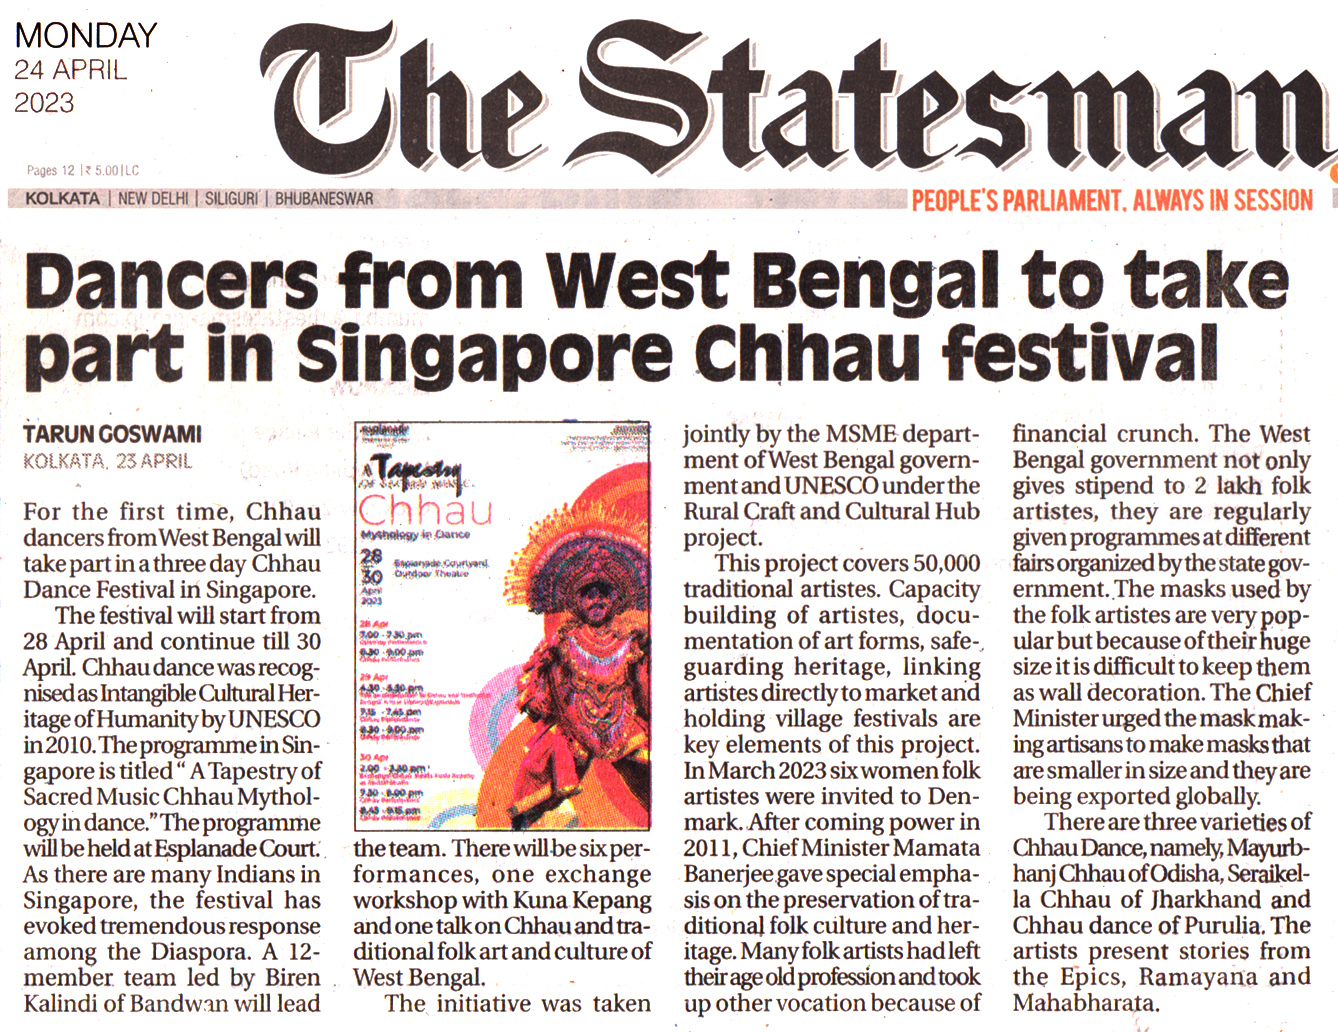 News clippings_Dancers from West Bengal to take part in Singapore Chhau festival_The Statesman 24-04-2023